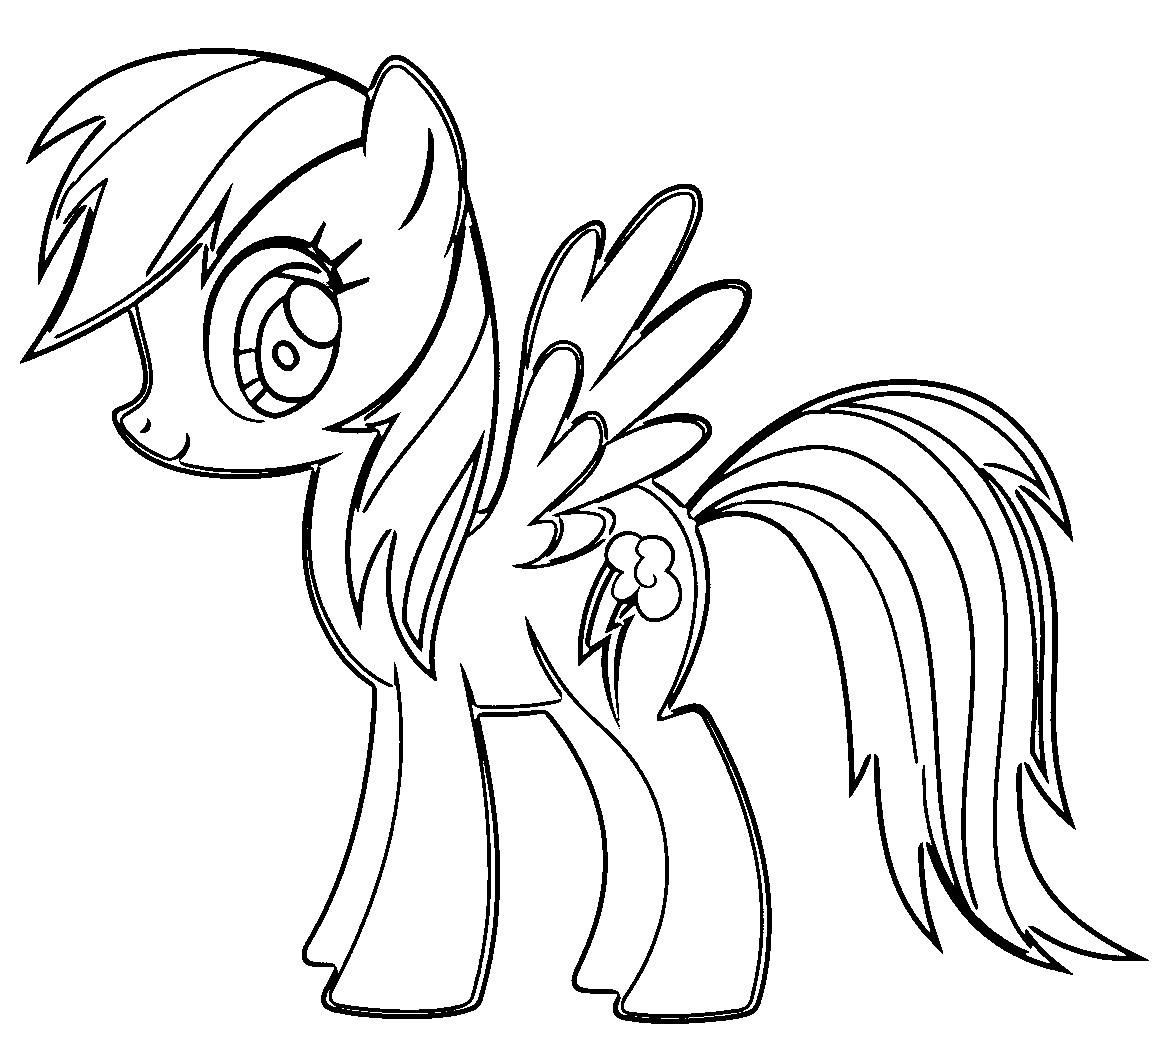 Rainbow Dash Coloring Page | Free download on ClipArtMag